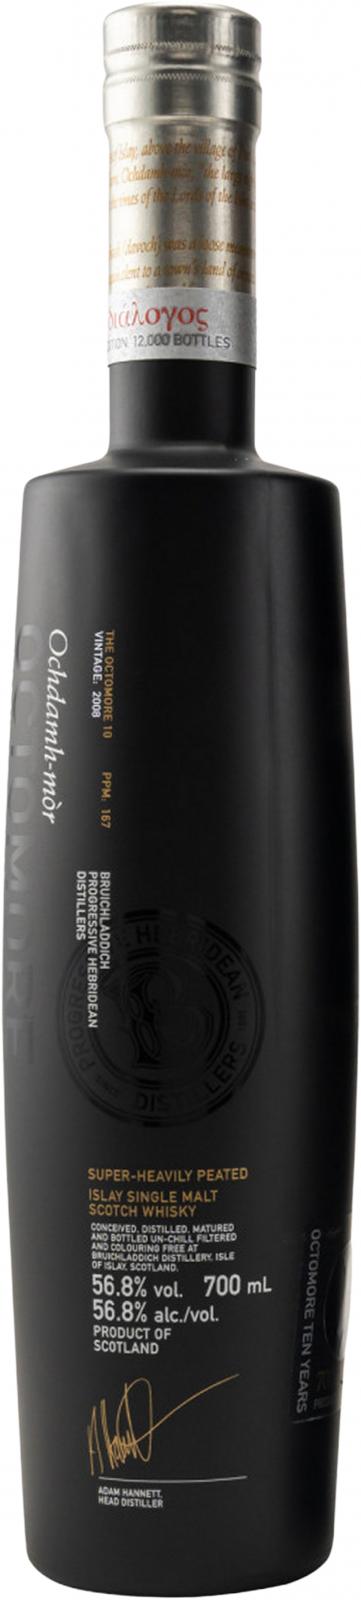 Octomore 10-year-old διάλογος